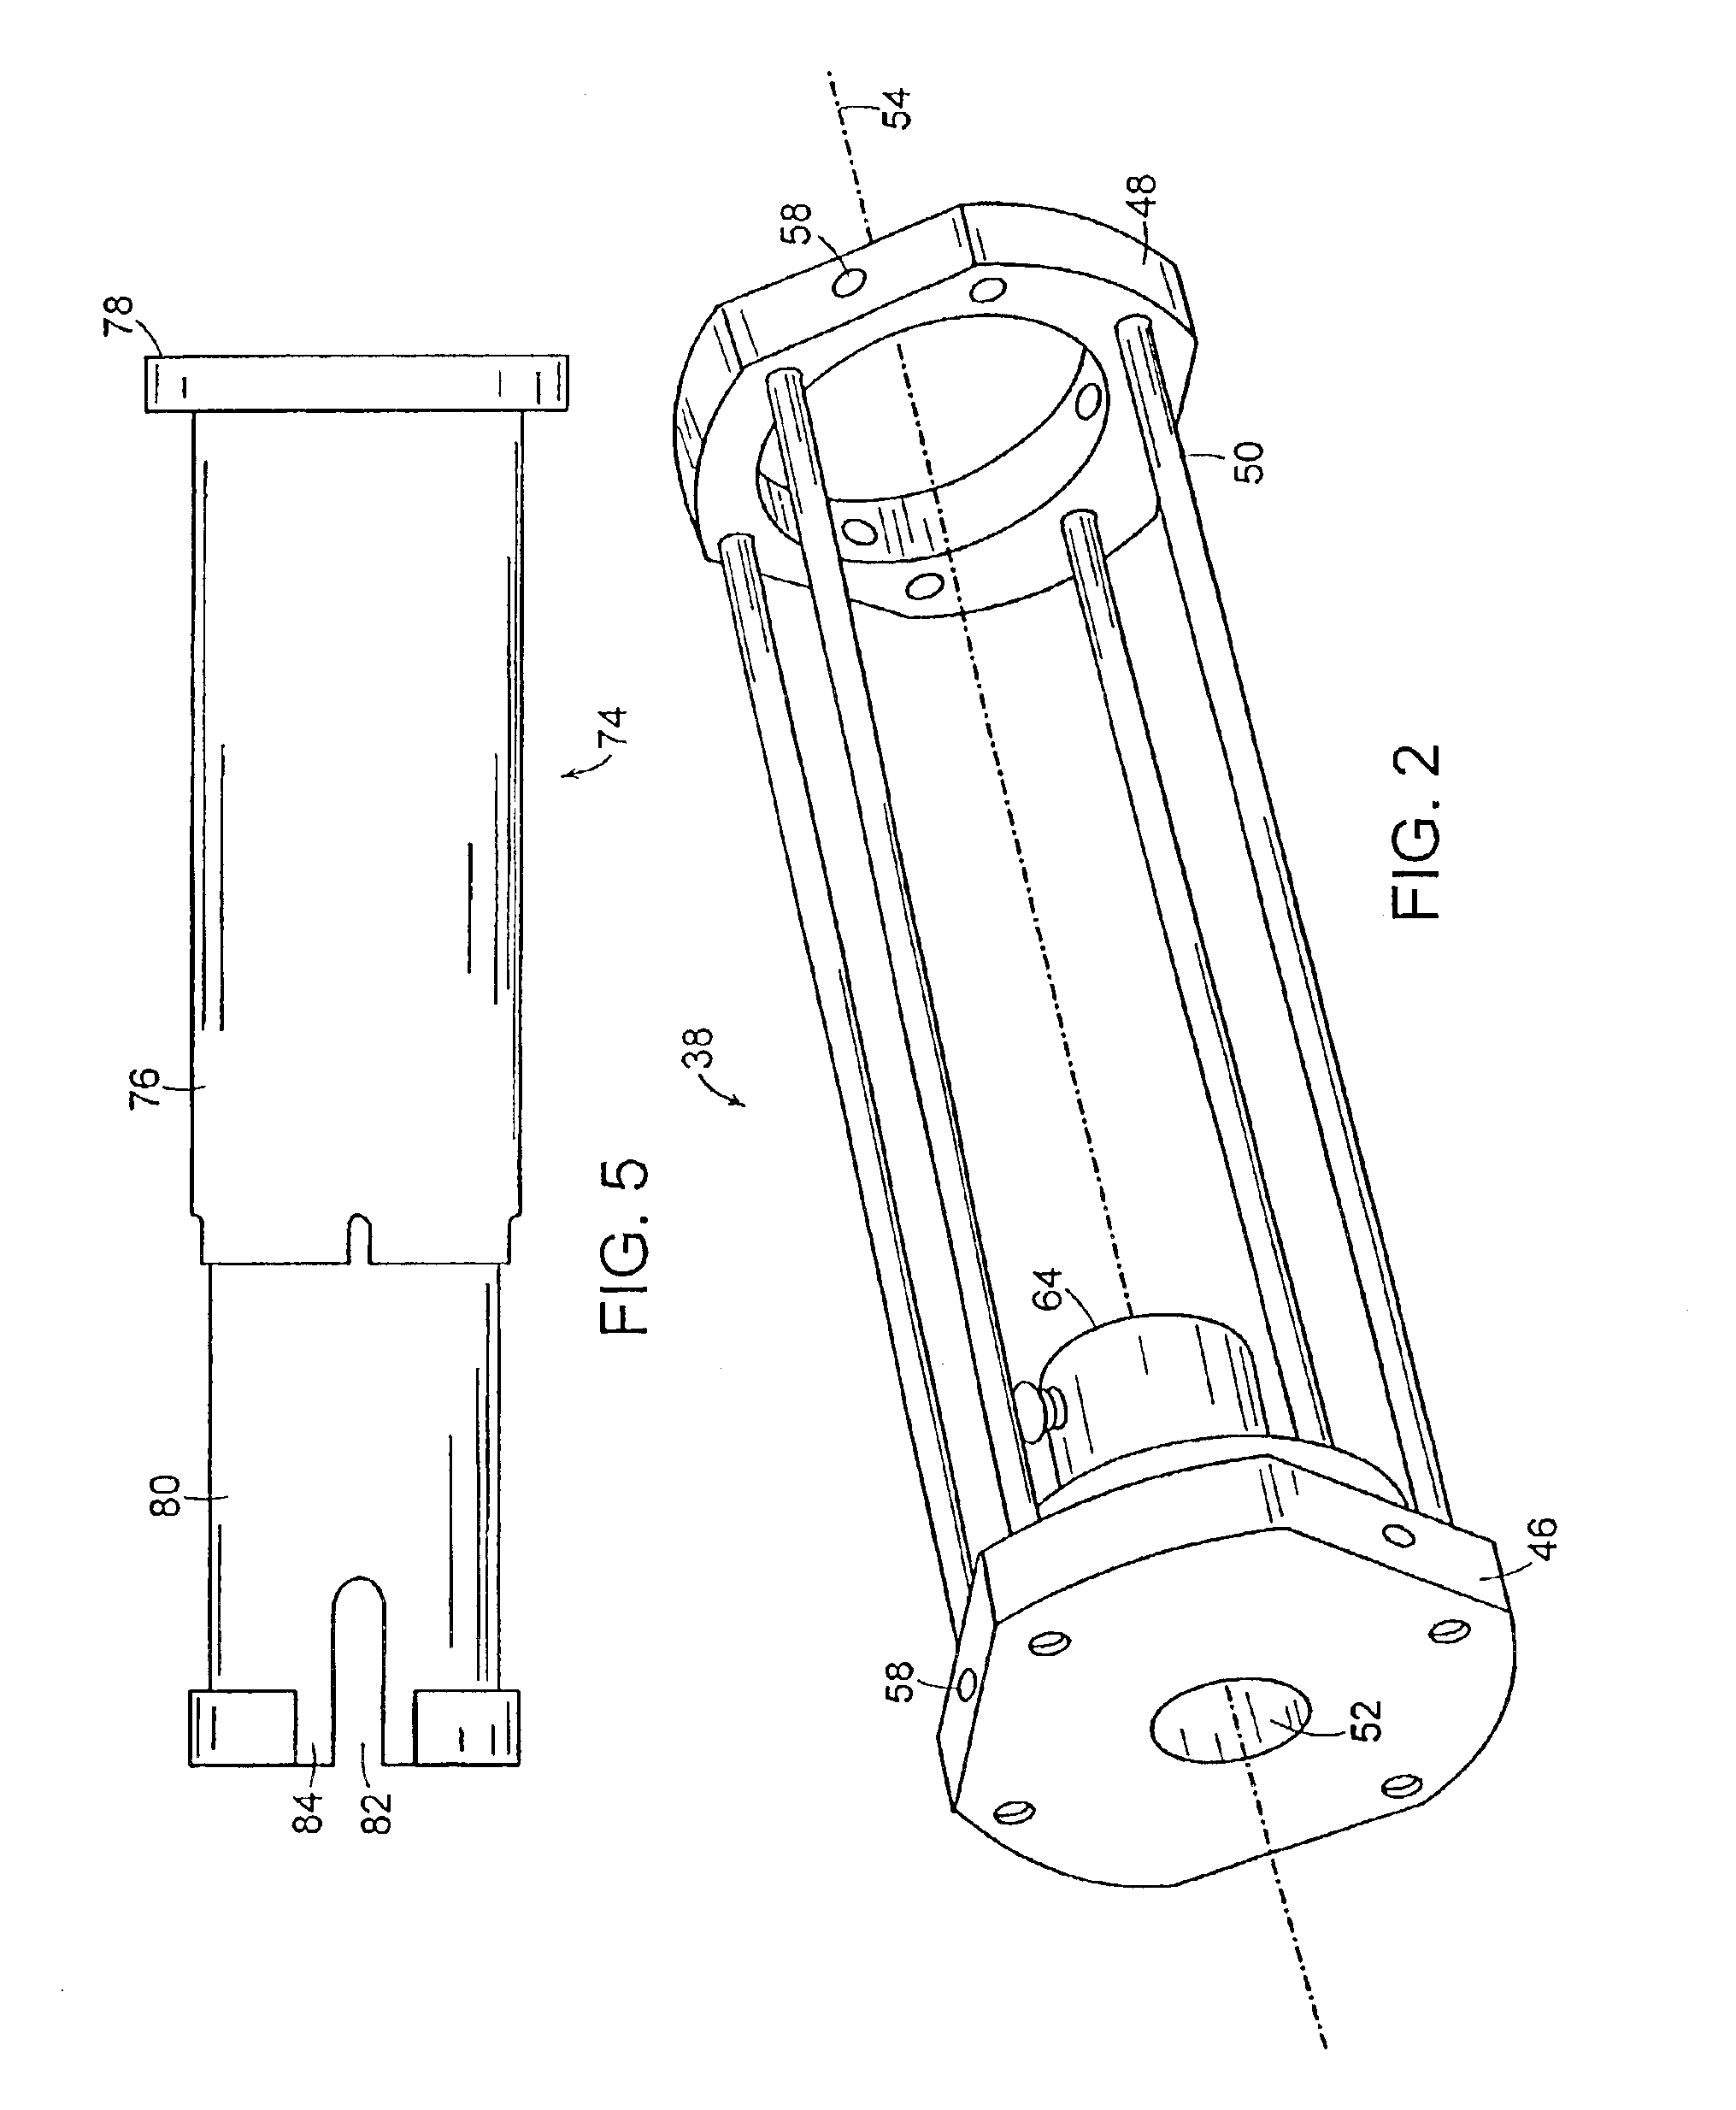 Method and apparatus for performing neuroimaging